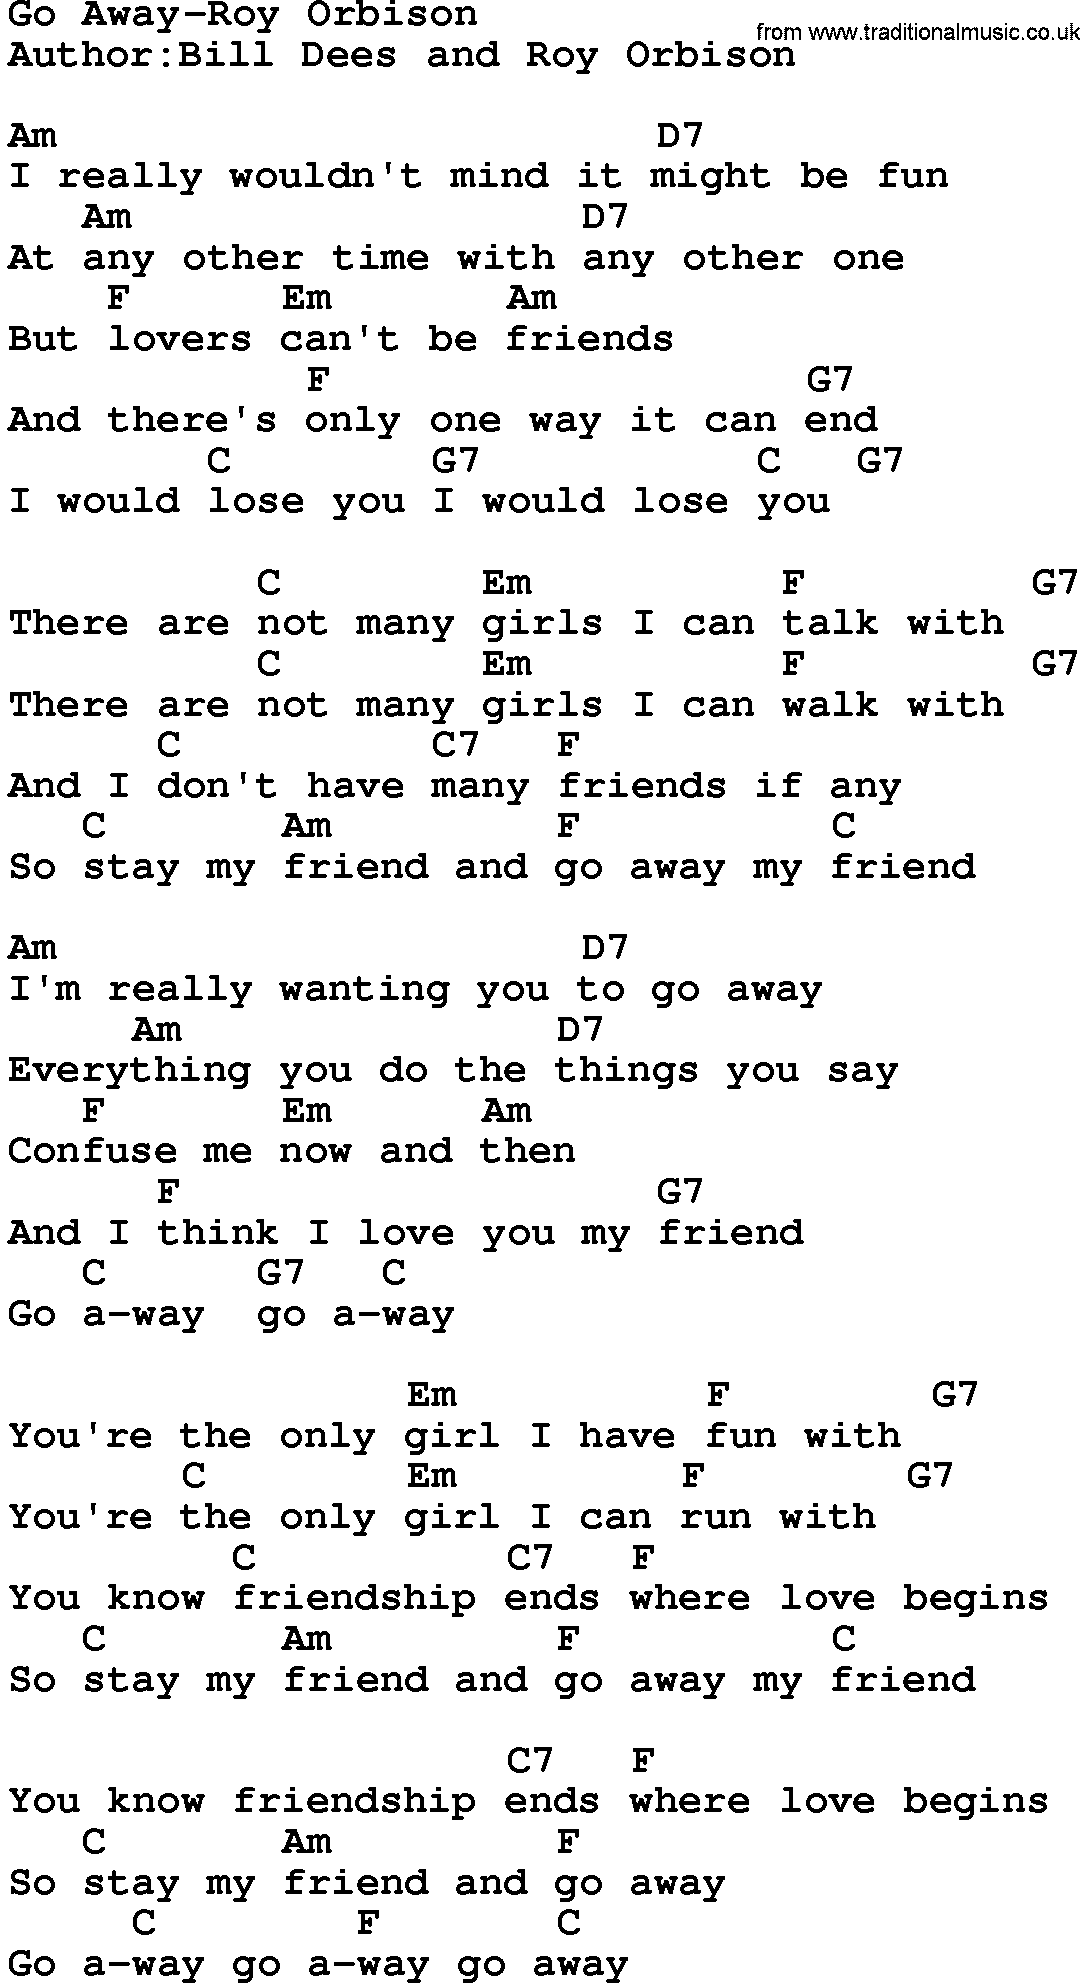 Country music song: Go Away-Roy Orbison lyrics and chords